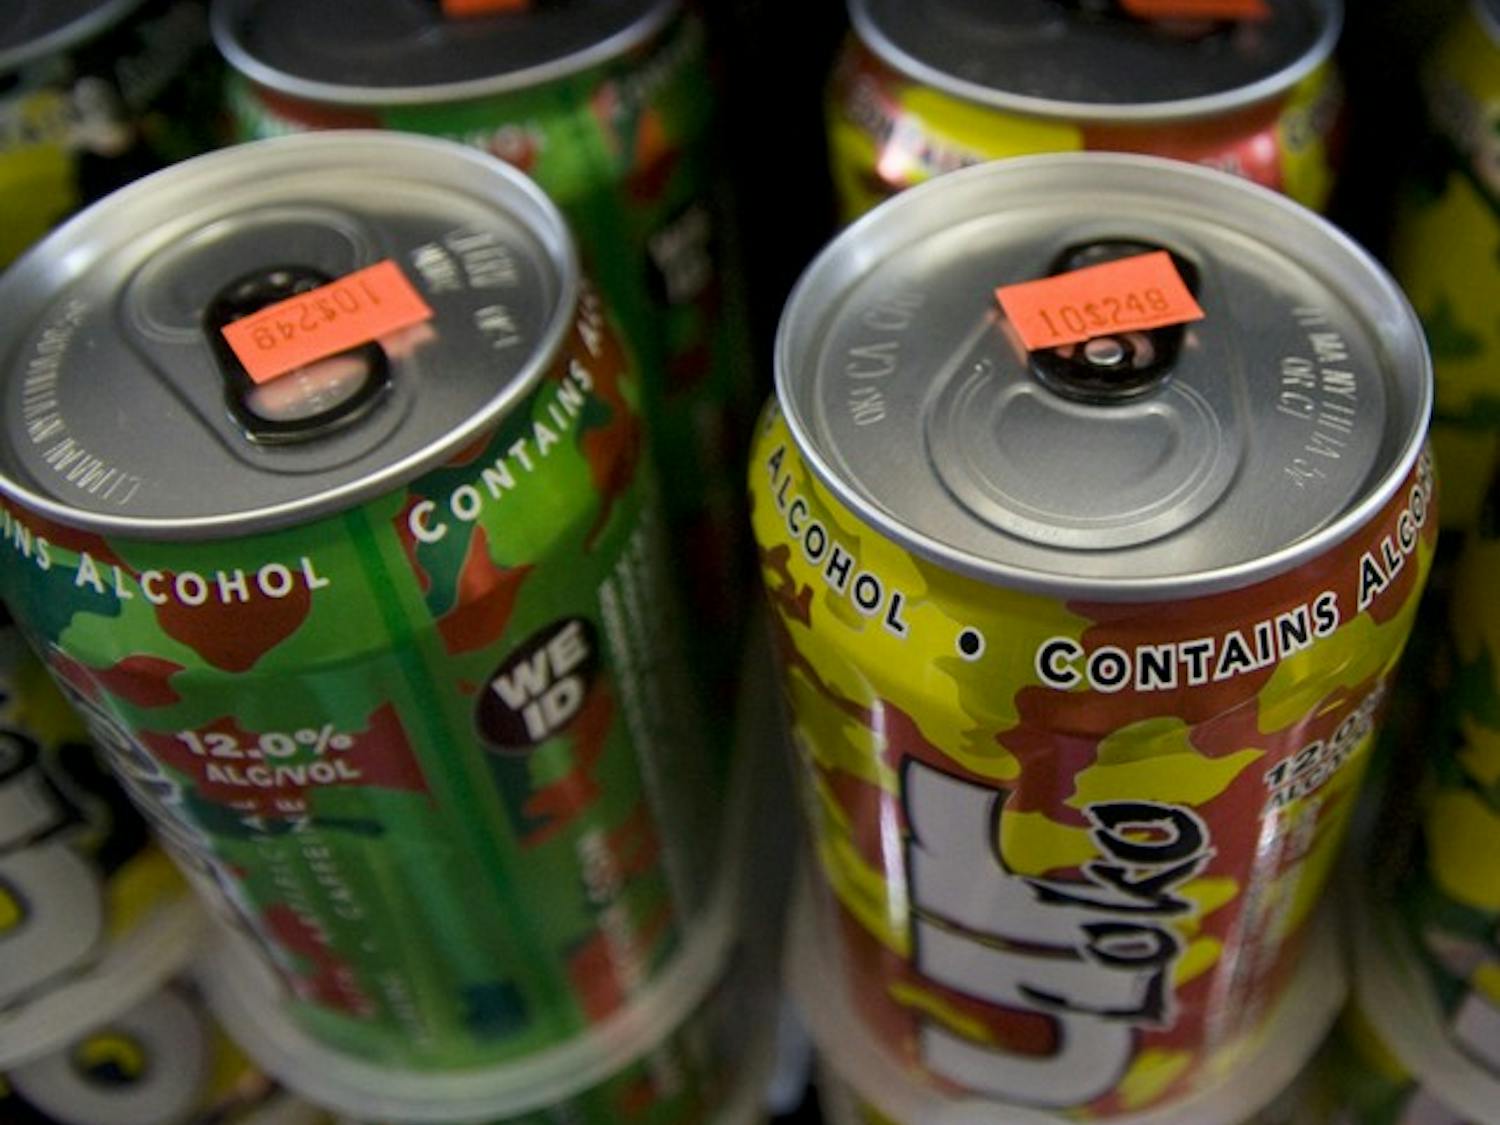 These cans of Four Loko are still being sold at TJ’s Beverage and Tobacco. Since threat of a ban, sales of the beverage have increased.